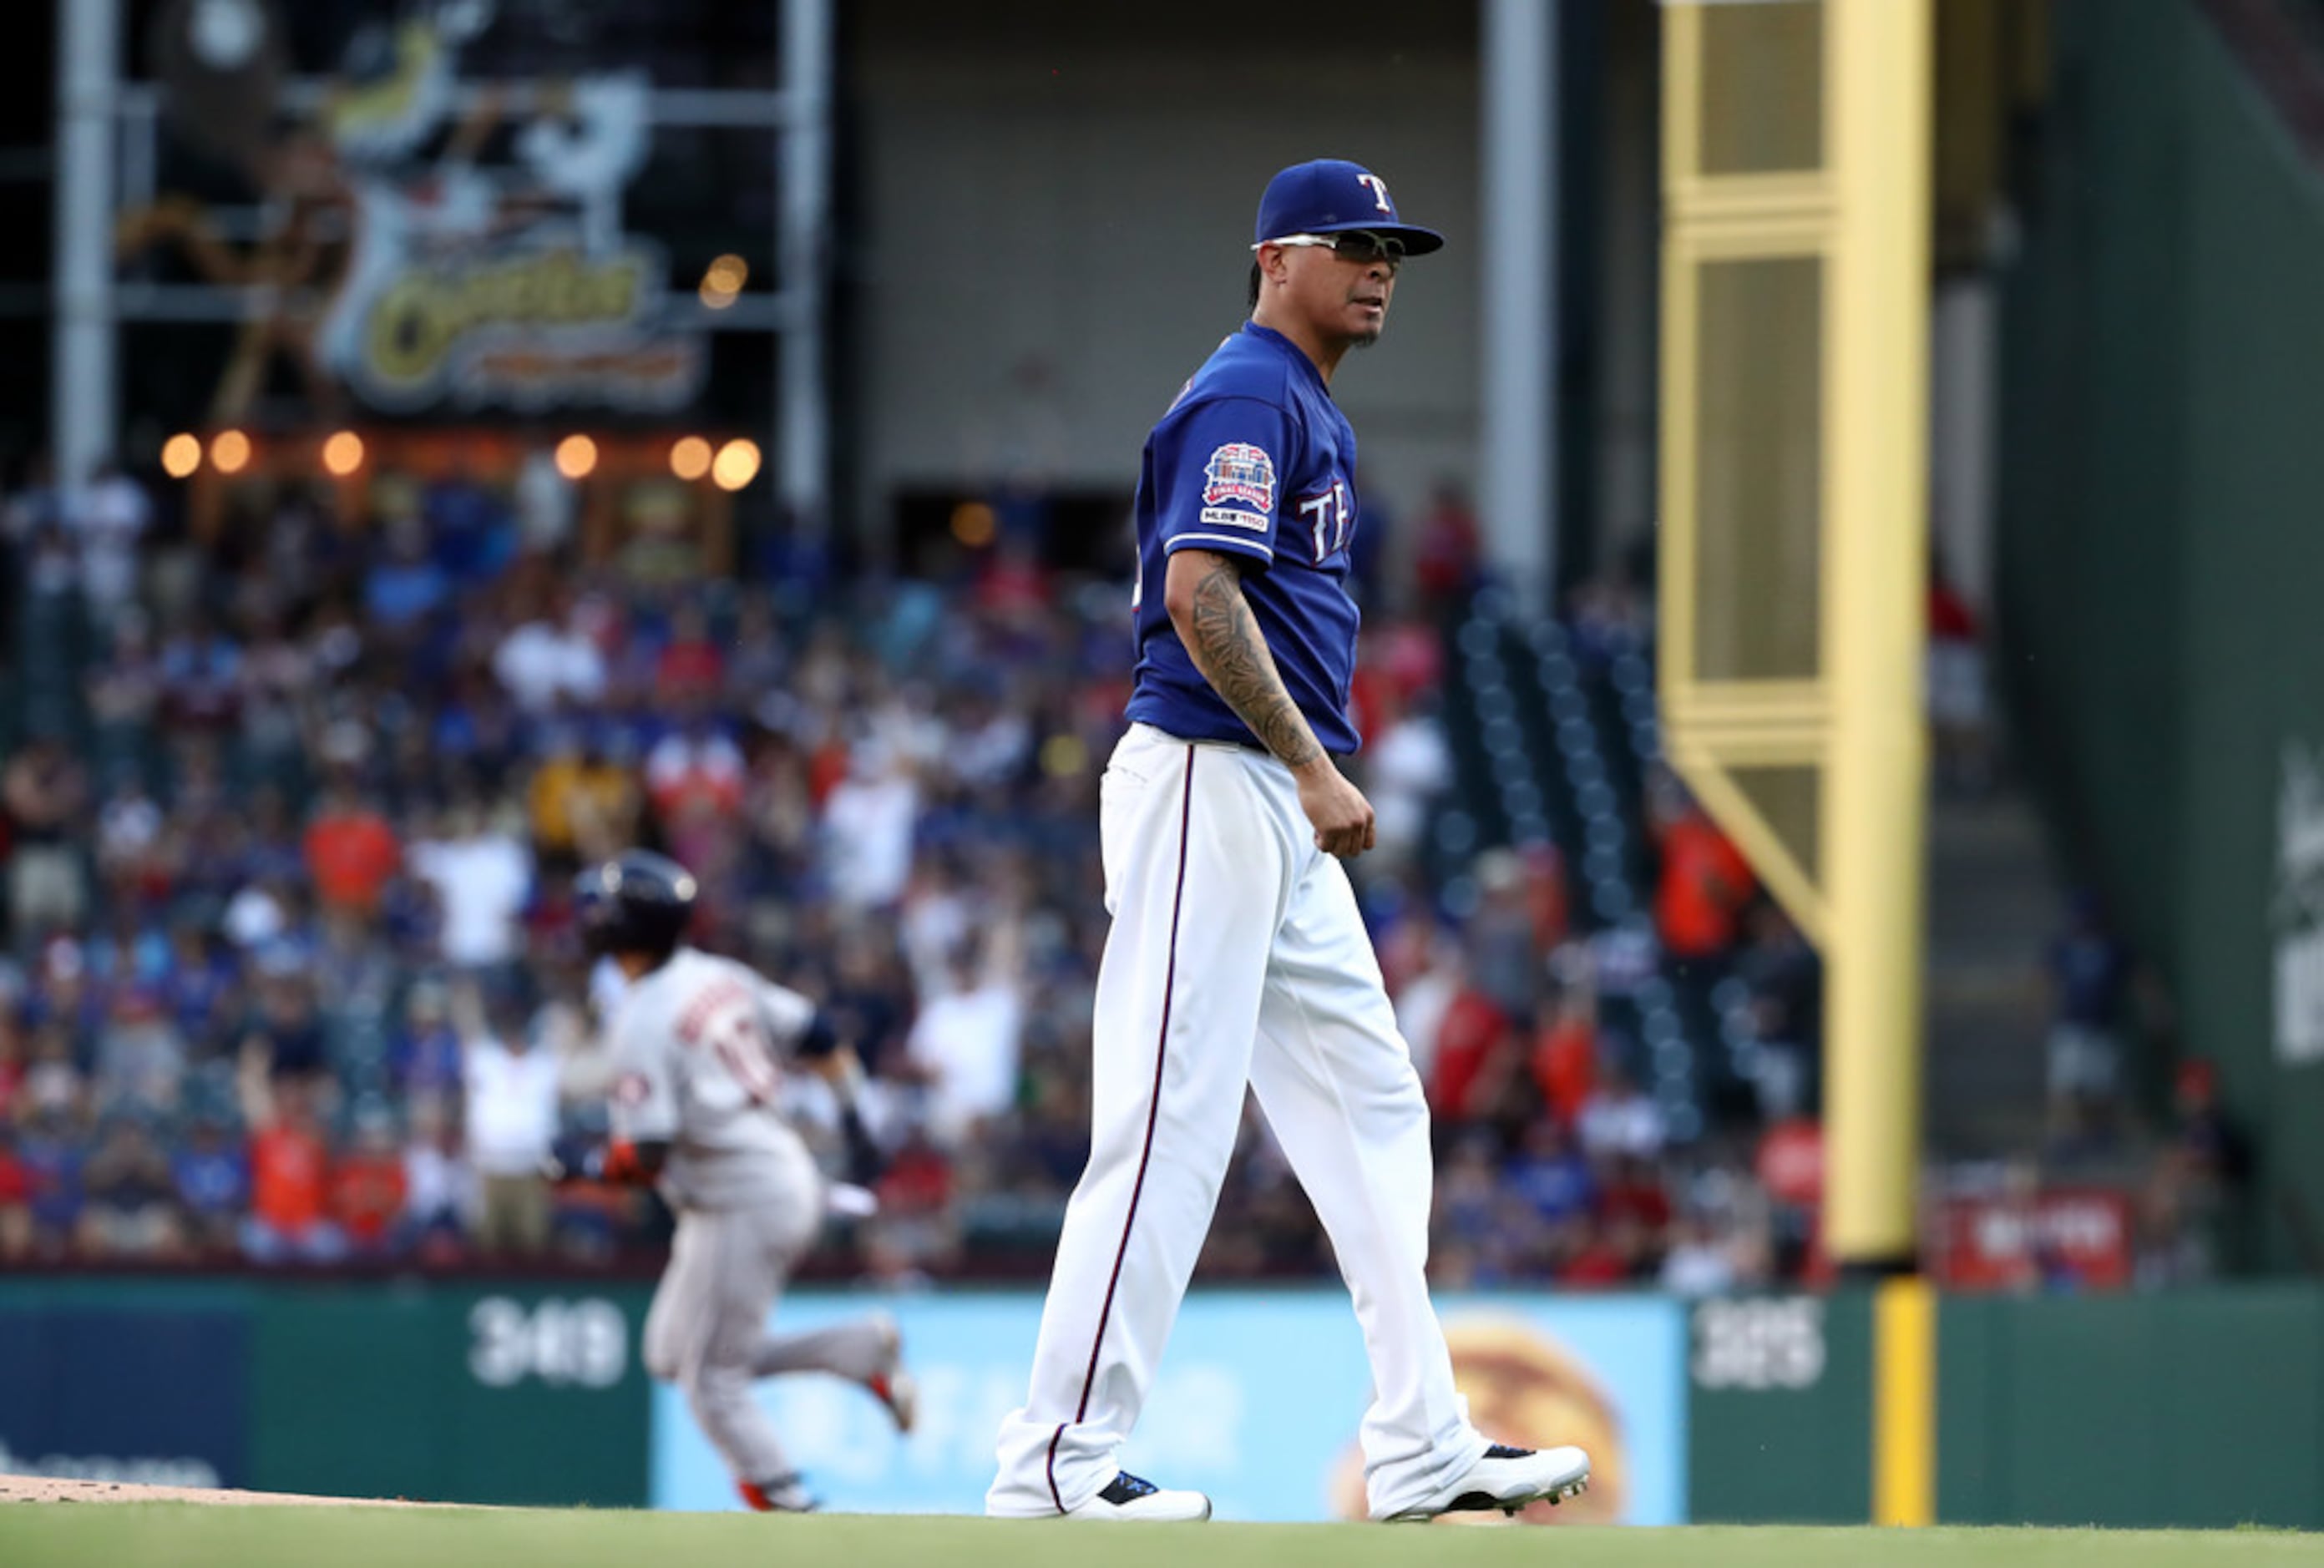 Rangers pitcher Jesse Chavez offered home plate umpire Rob Drake his glasses  after two controversial non-strike calls